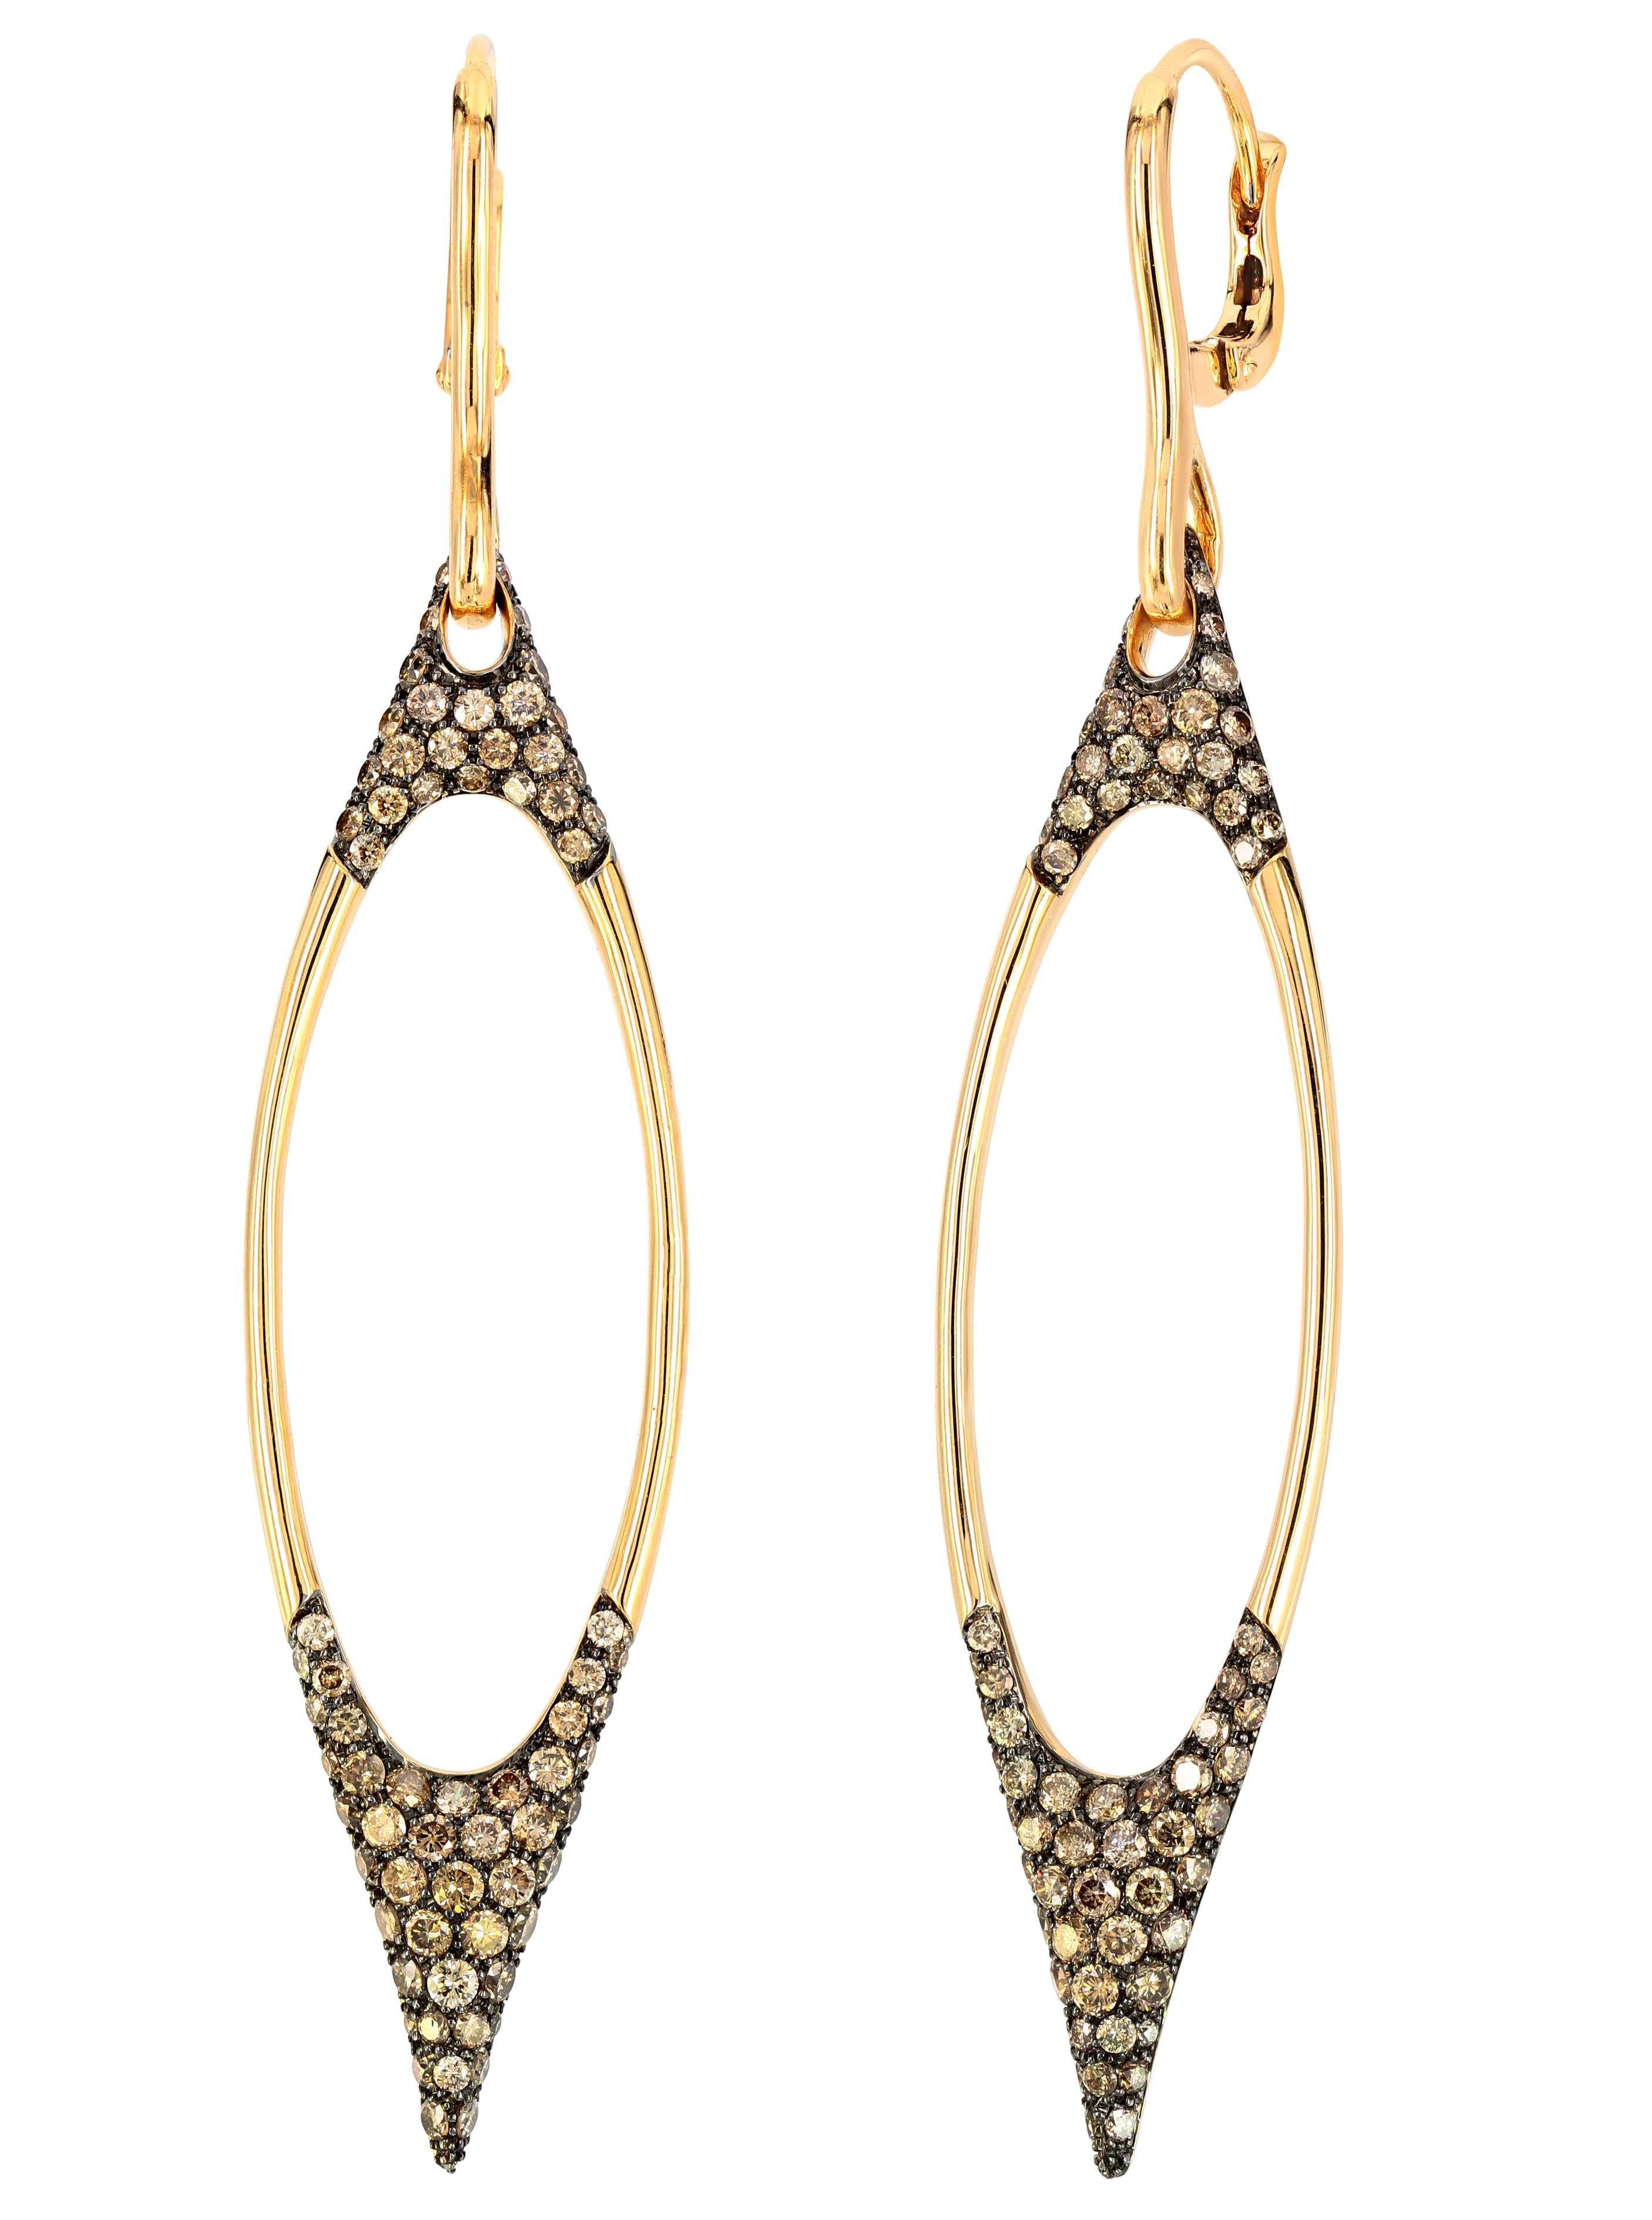 Contemporary Etho Maria 18 Karat Yellow Gold and Brown Diamond Earrings